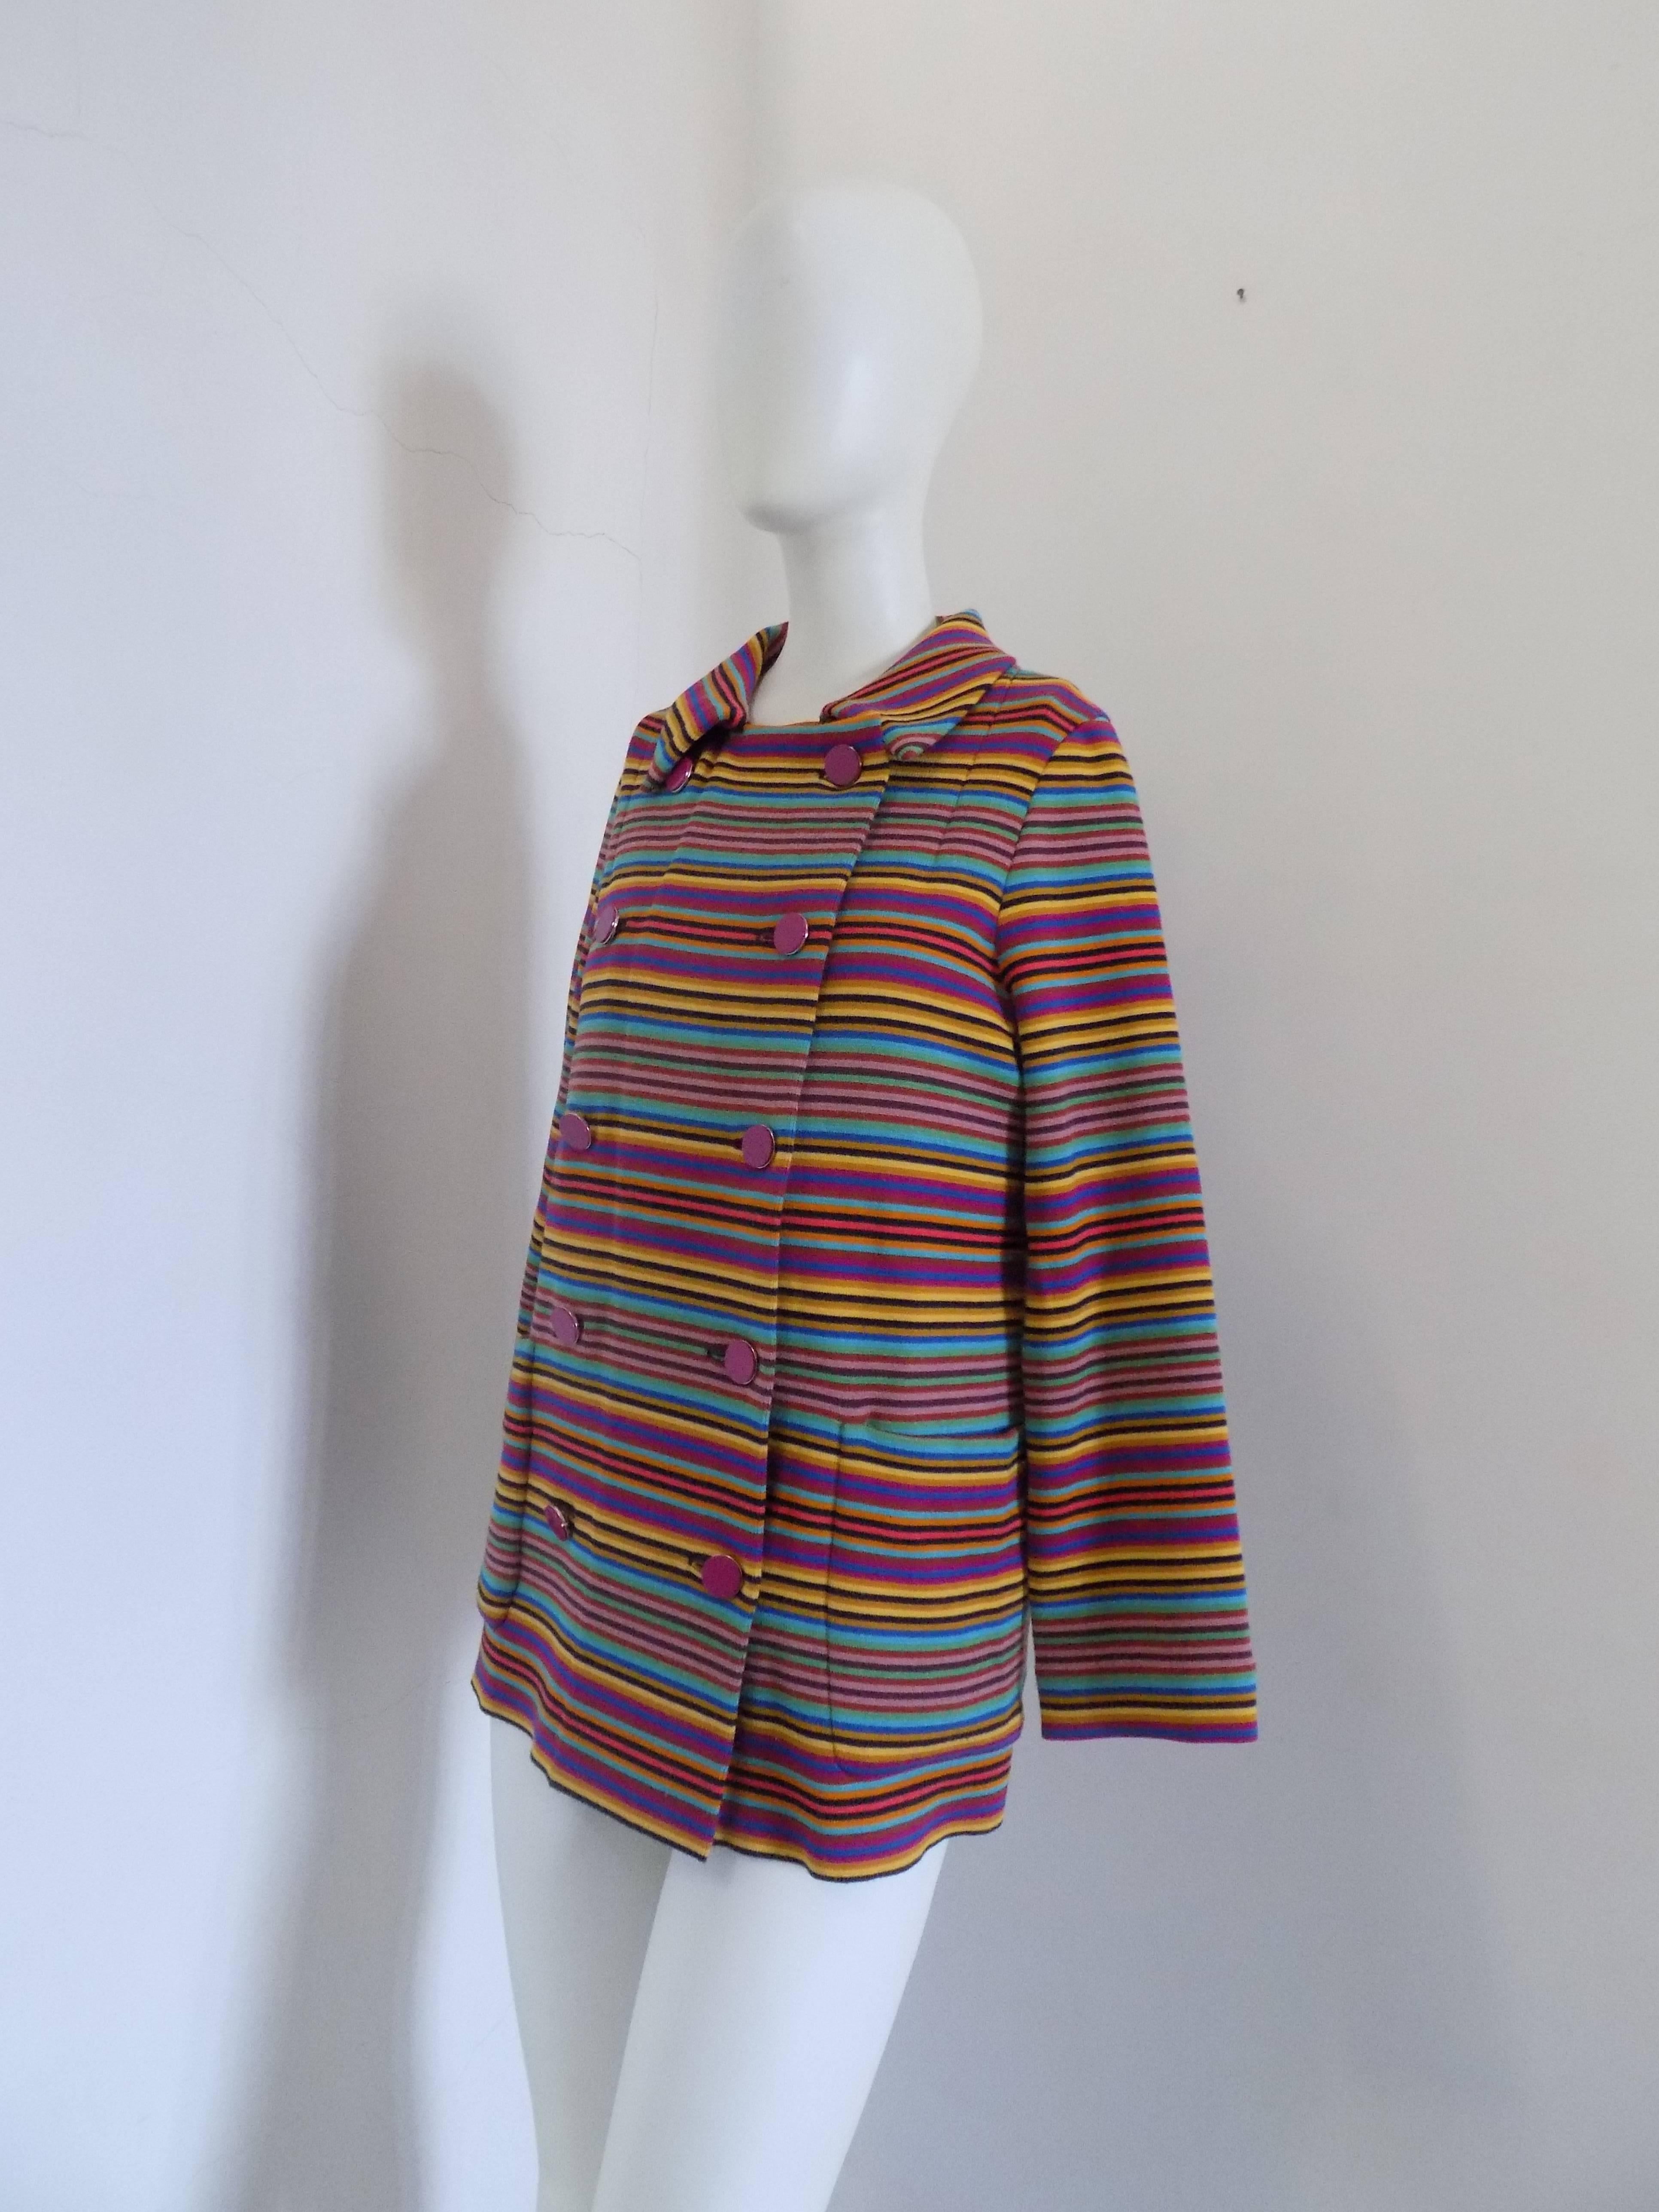 Marc by Marc Jacobs multicolour jacket 
size S
Made in china in 100% cotton